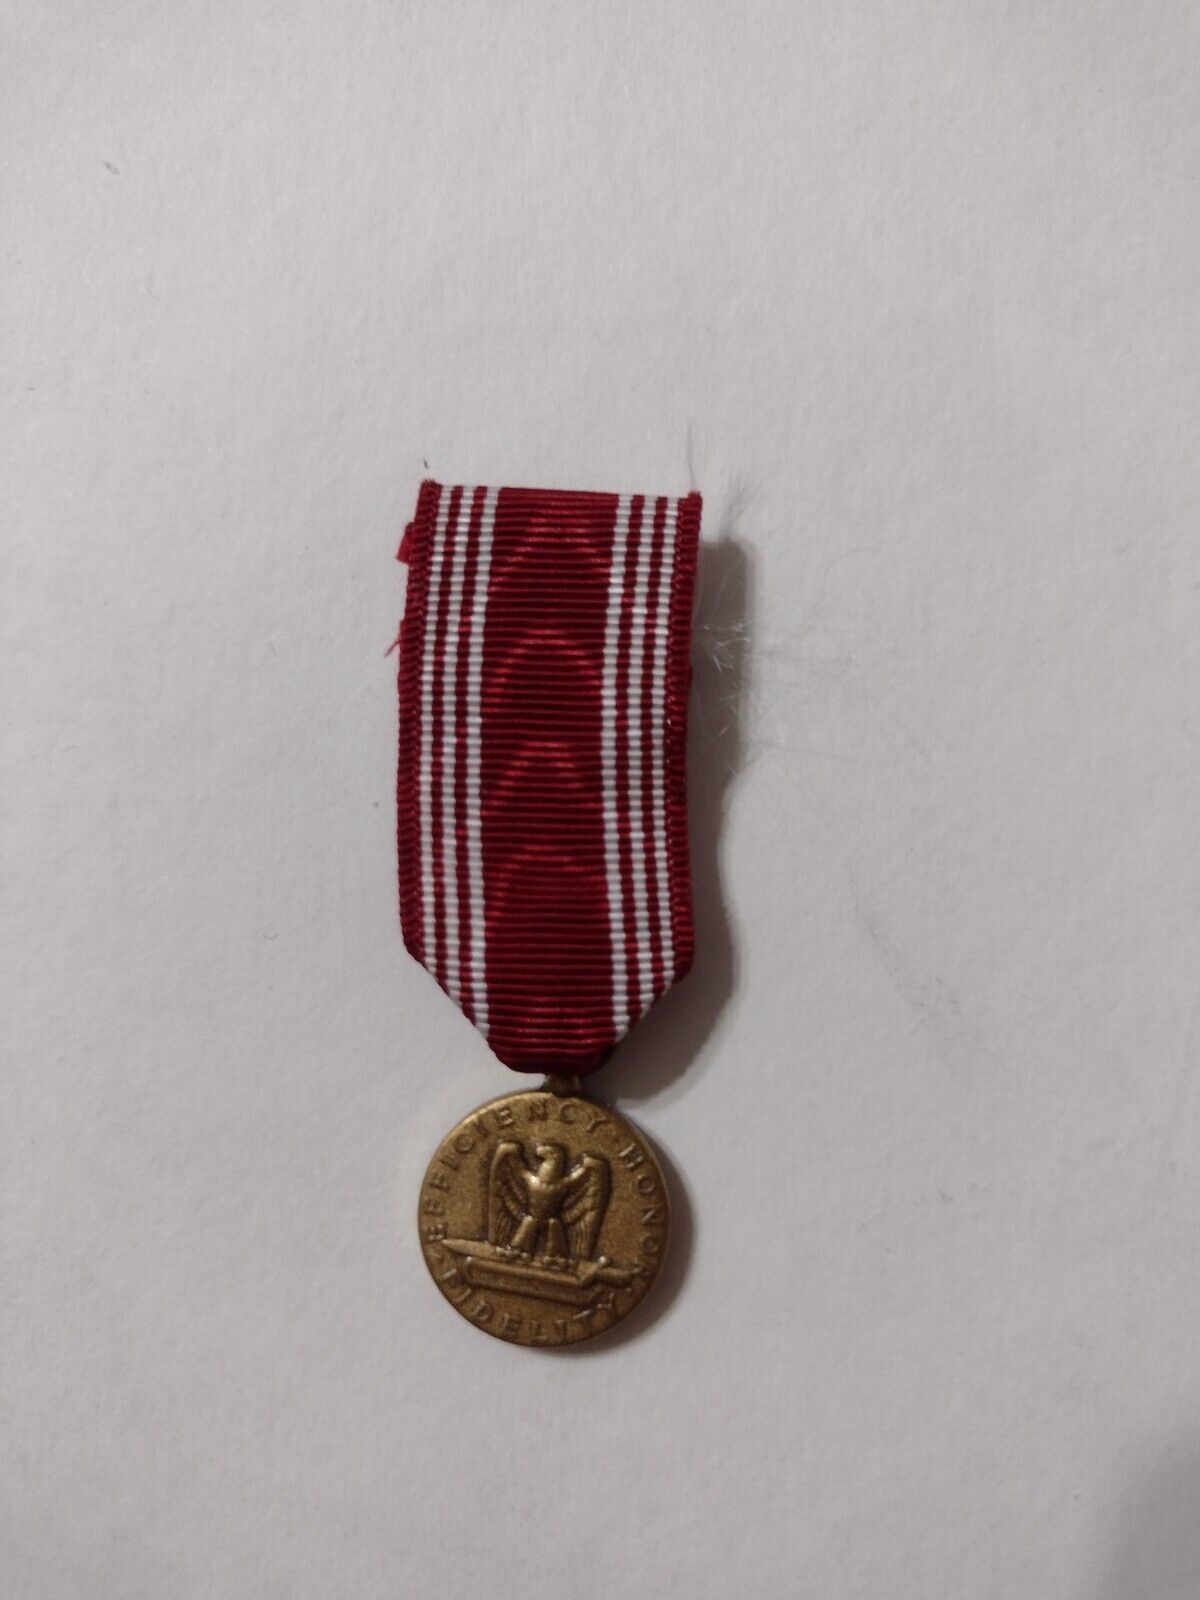 Primary image for ARMY GOOD CONDUCT MEDAL MINIATURE NIP :KY23-4